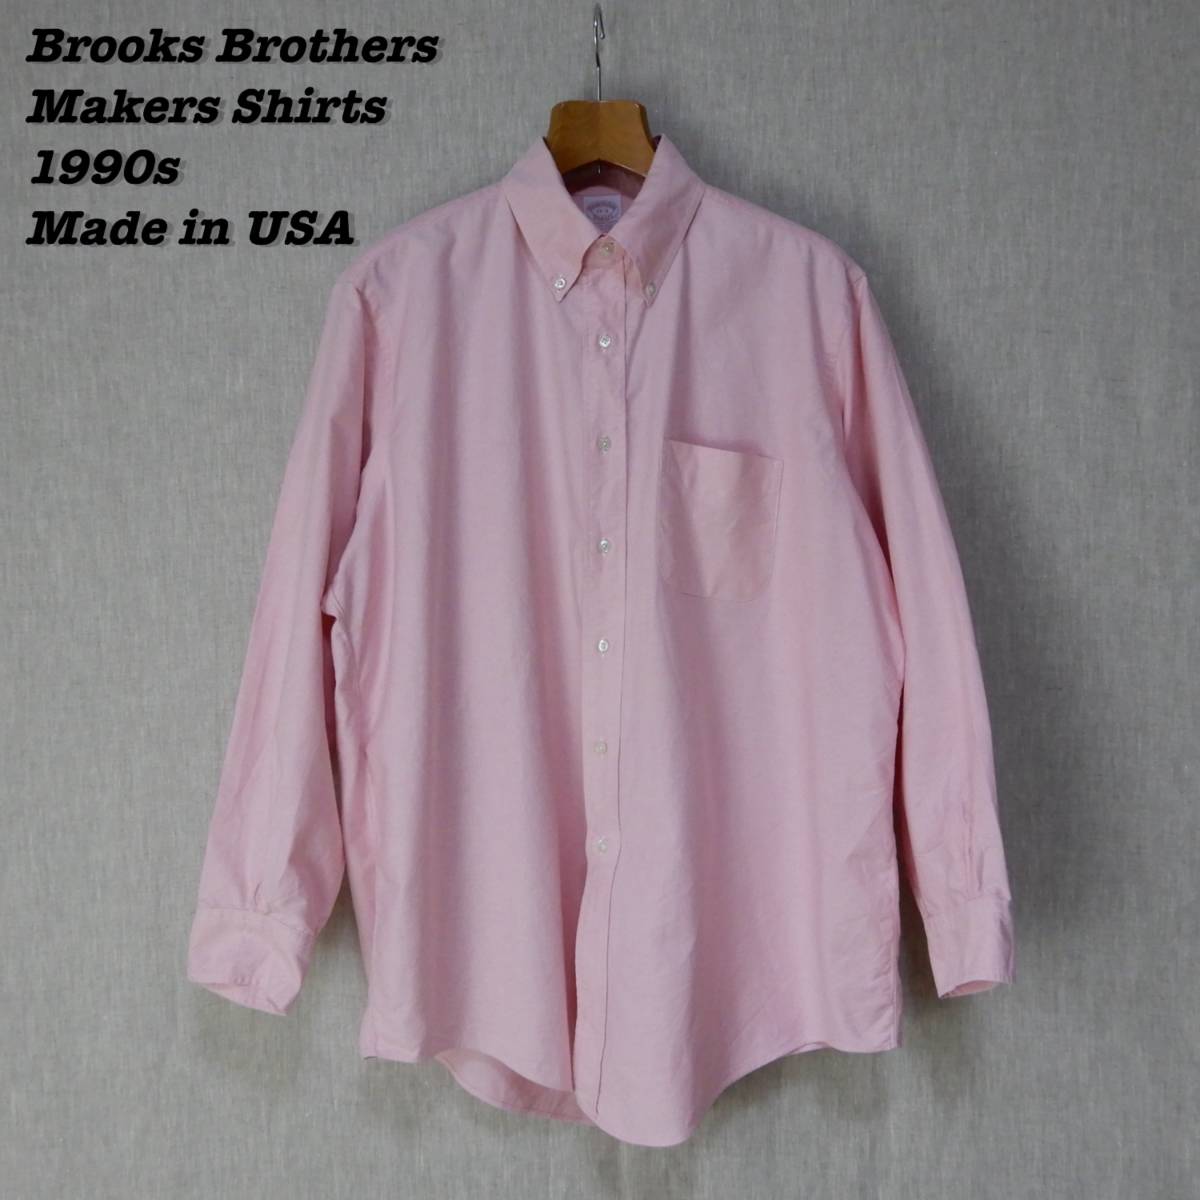 Brooks Brothers Makers B D Shirts Made in USA 17-3 BB17 ブルックス